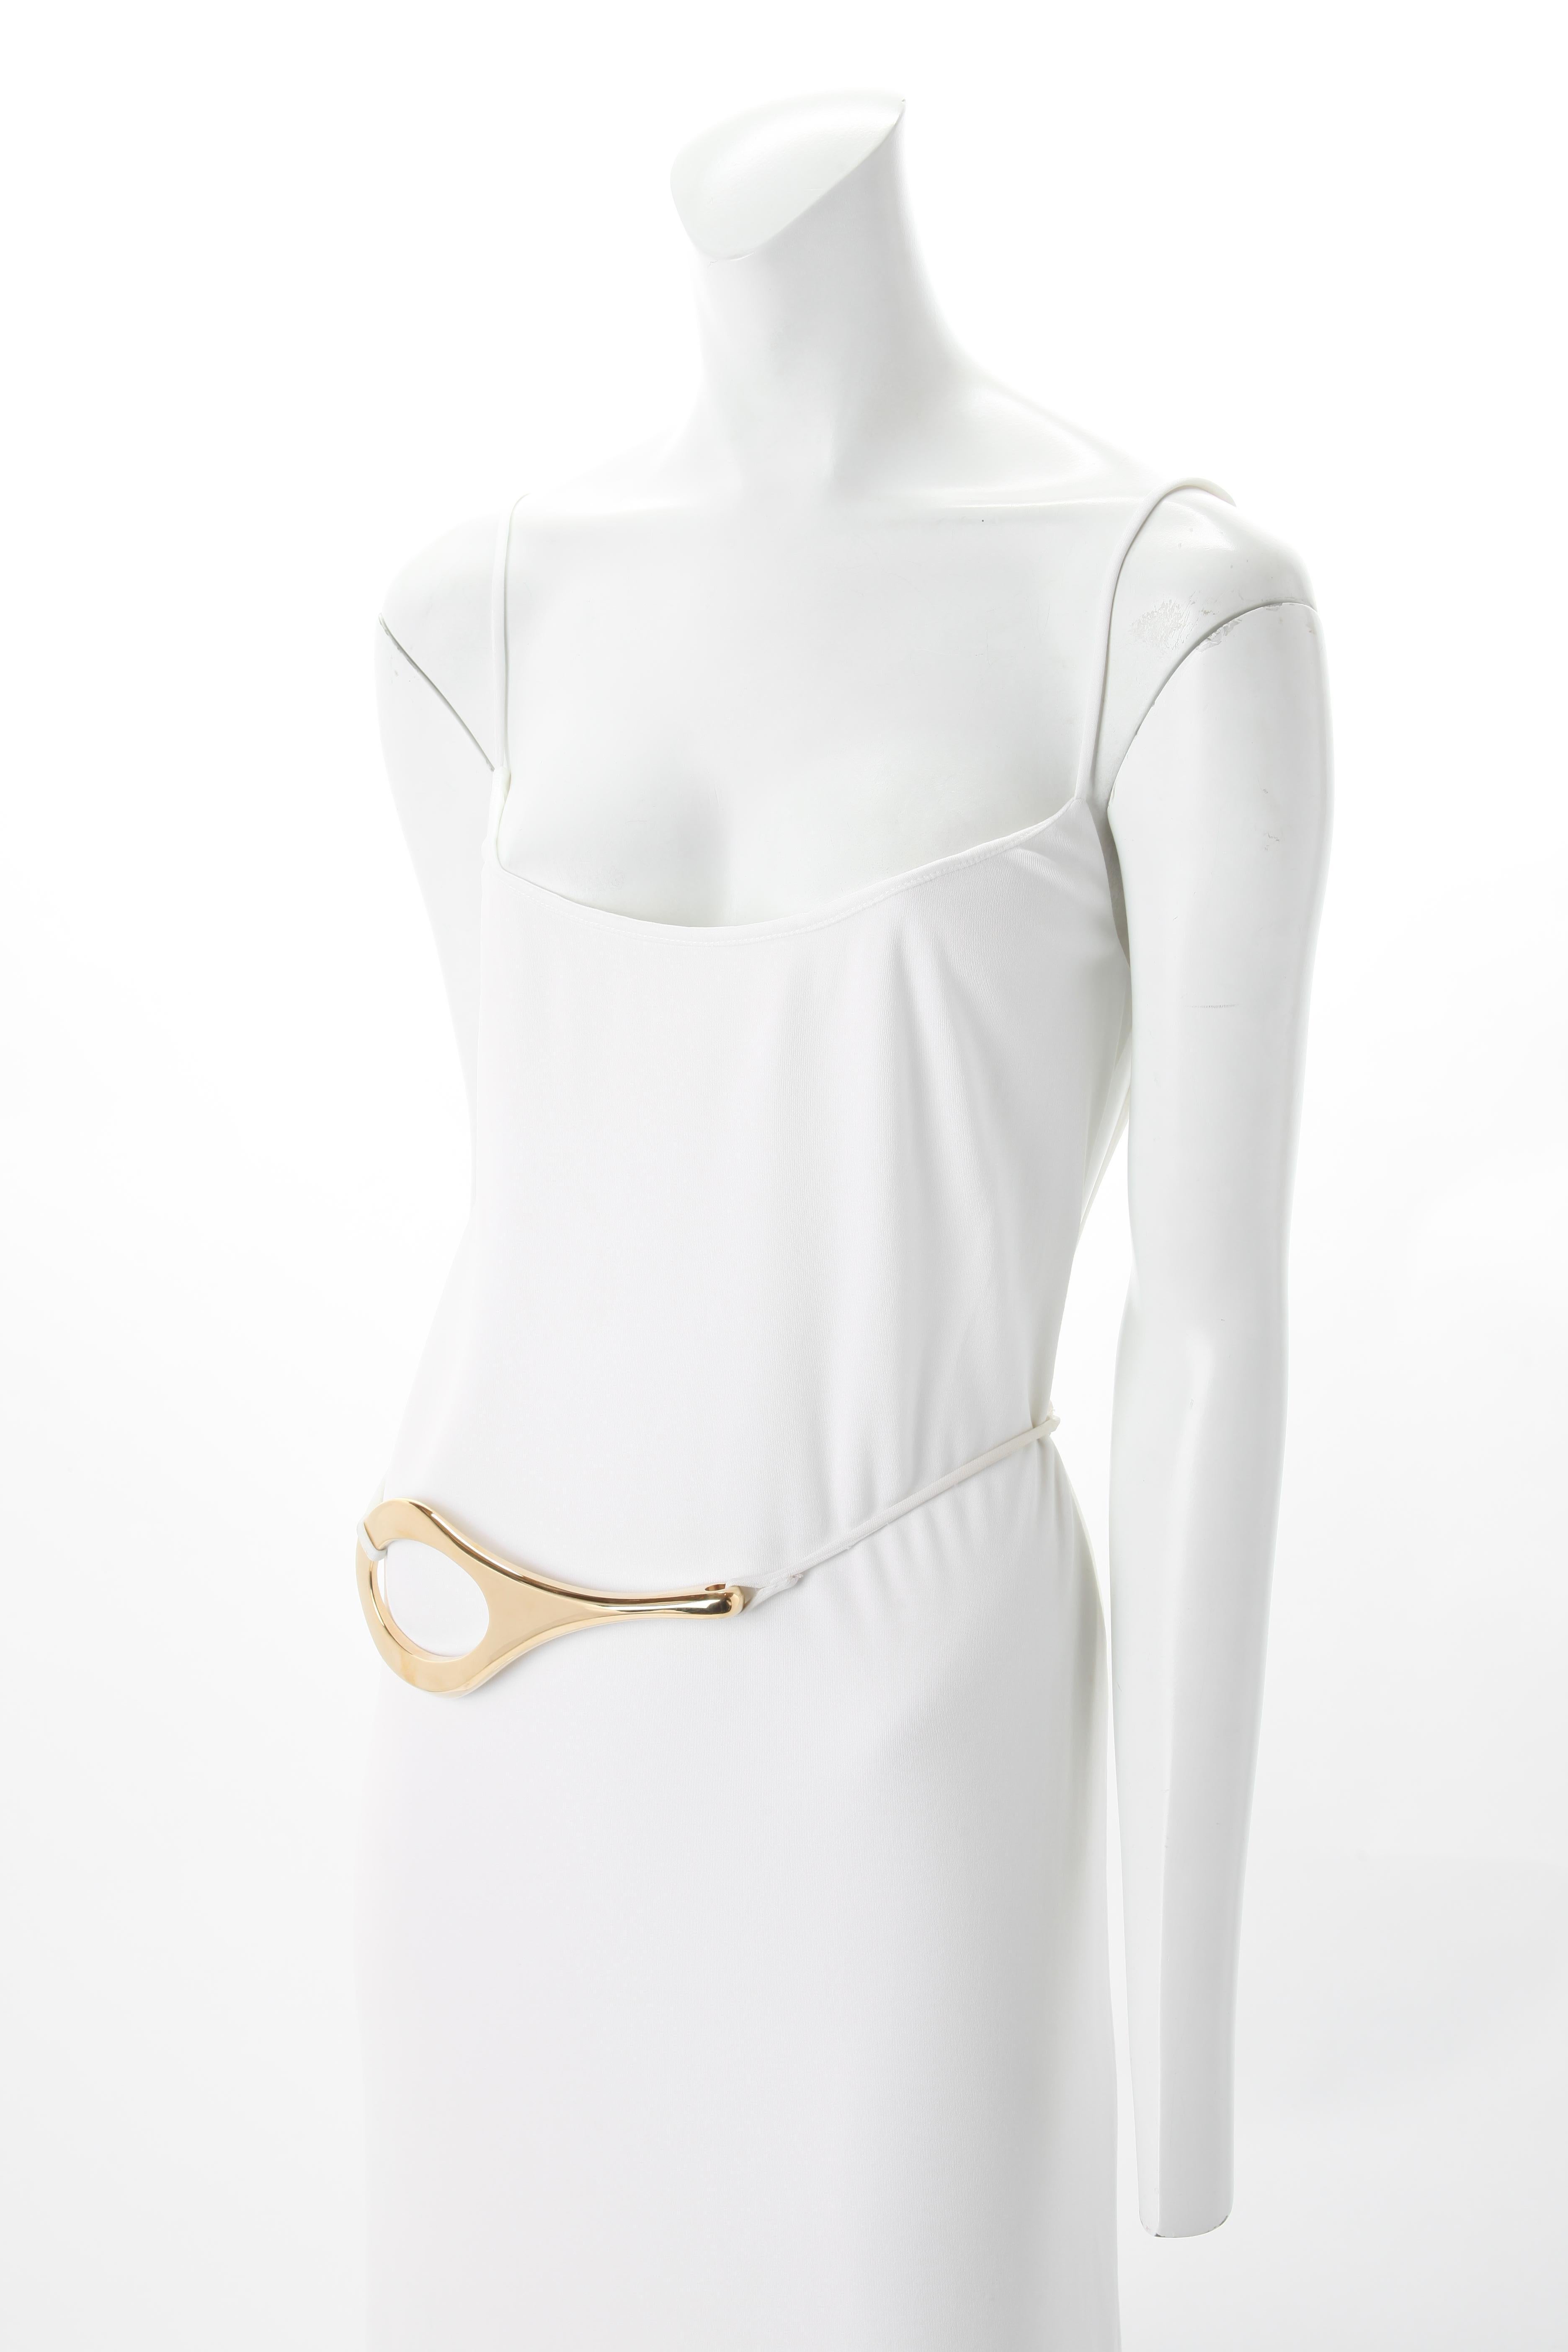 Tom Ford for Gucci Long White Jersey Belted Dress, F/W 1996.
Long White Spaghetti Strap Jersey Dress featuring Detachable Gold Cut-Out Belt. 
Fits US Size 0 to 6.